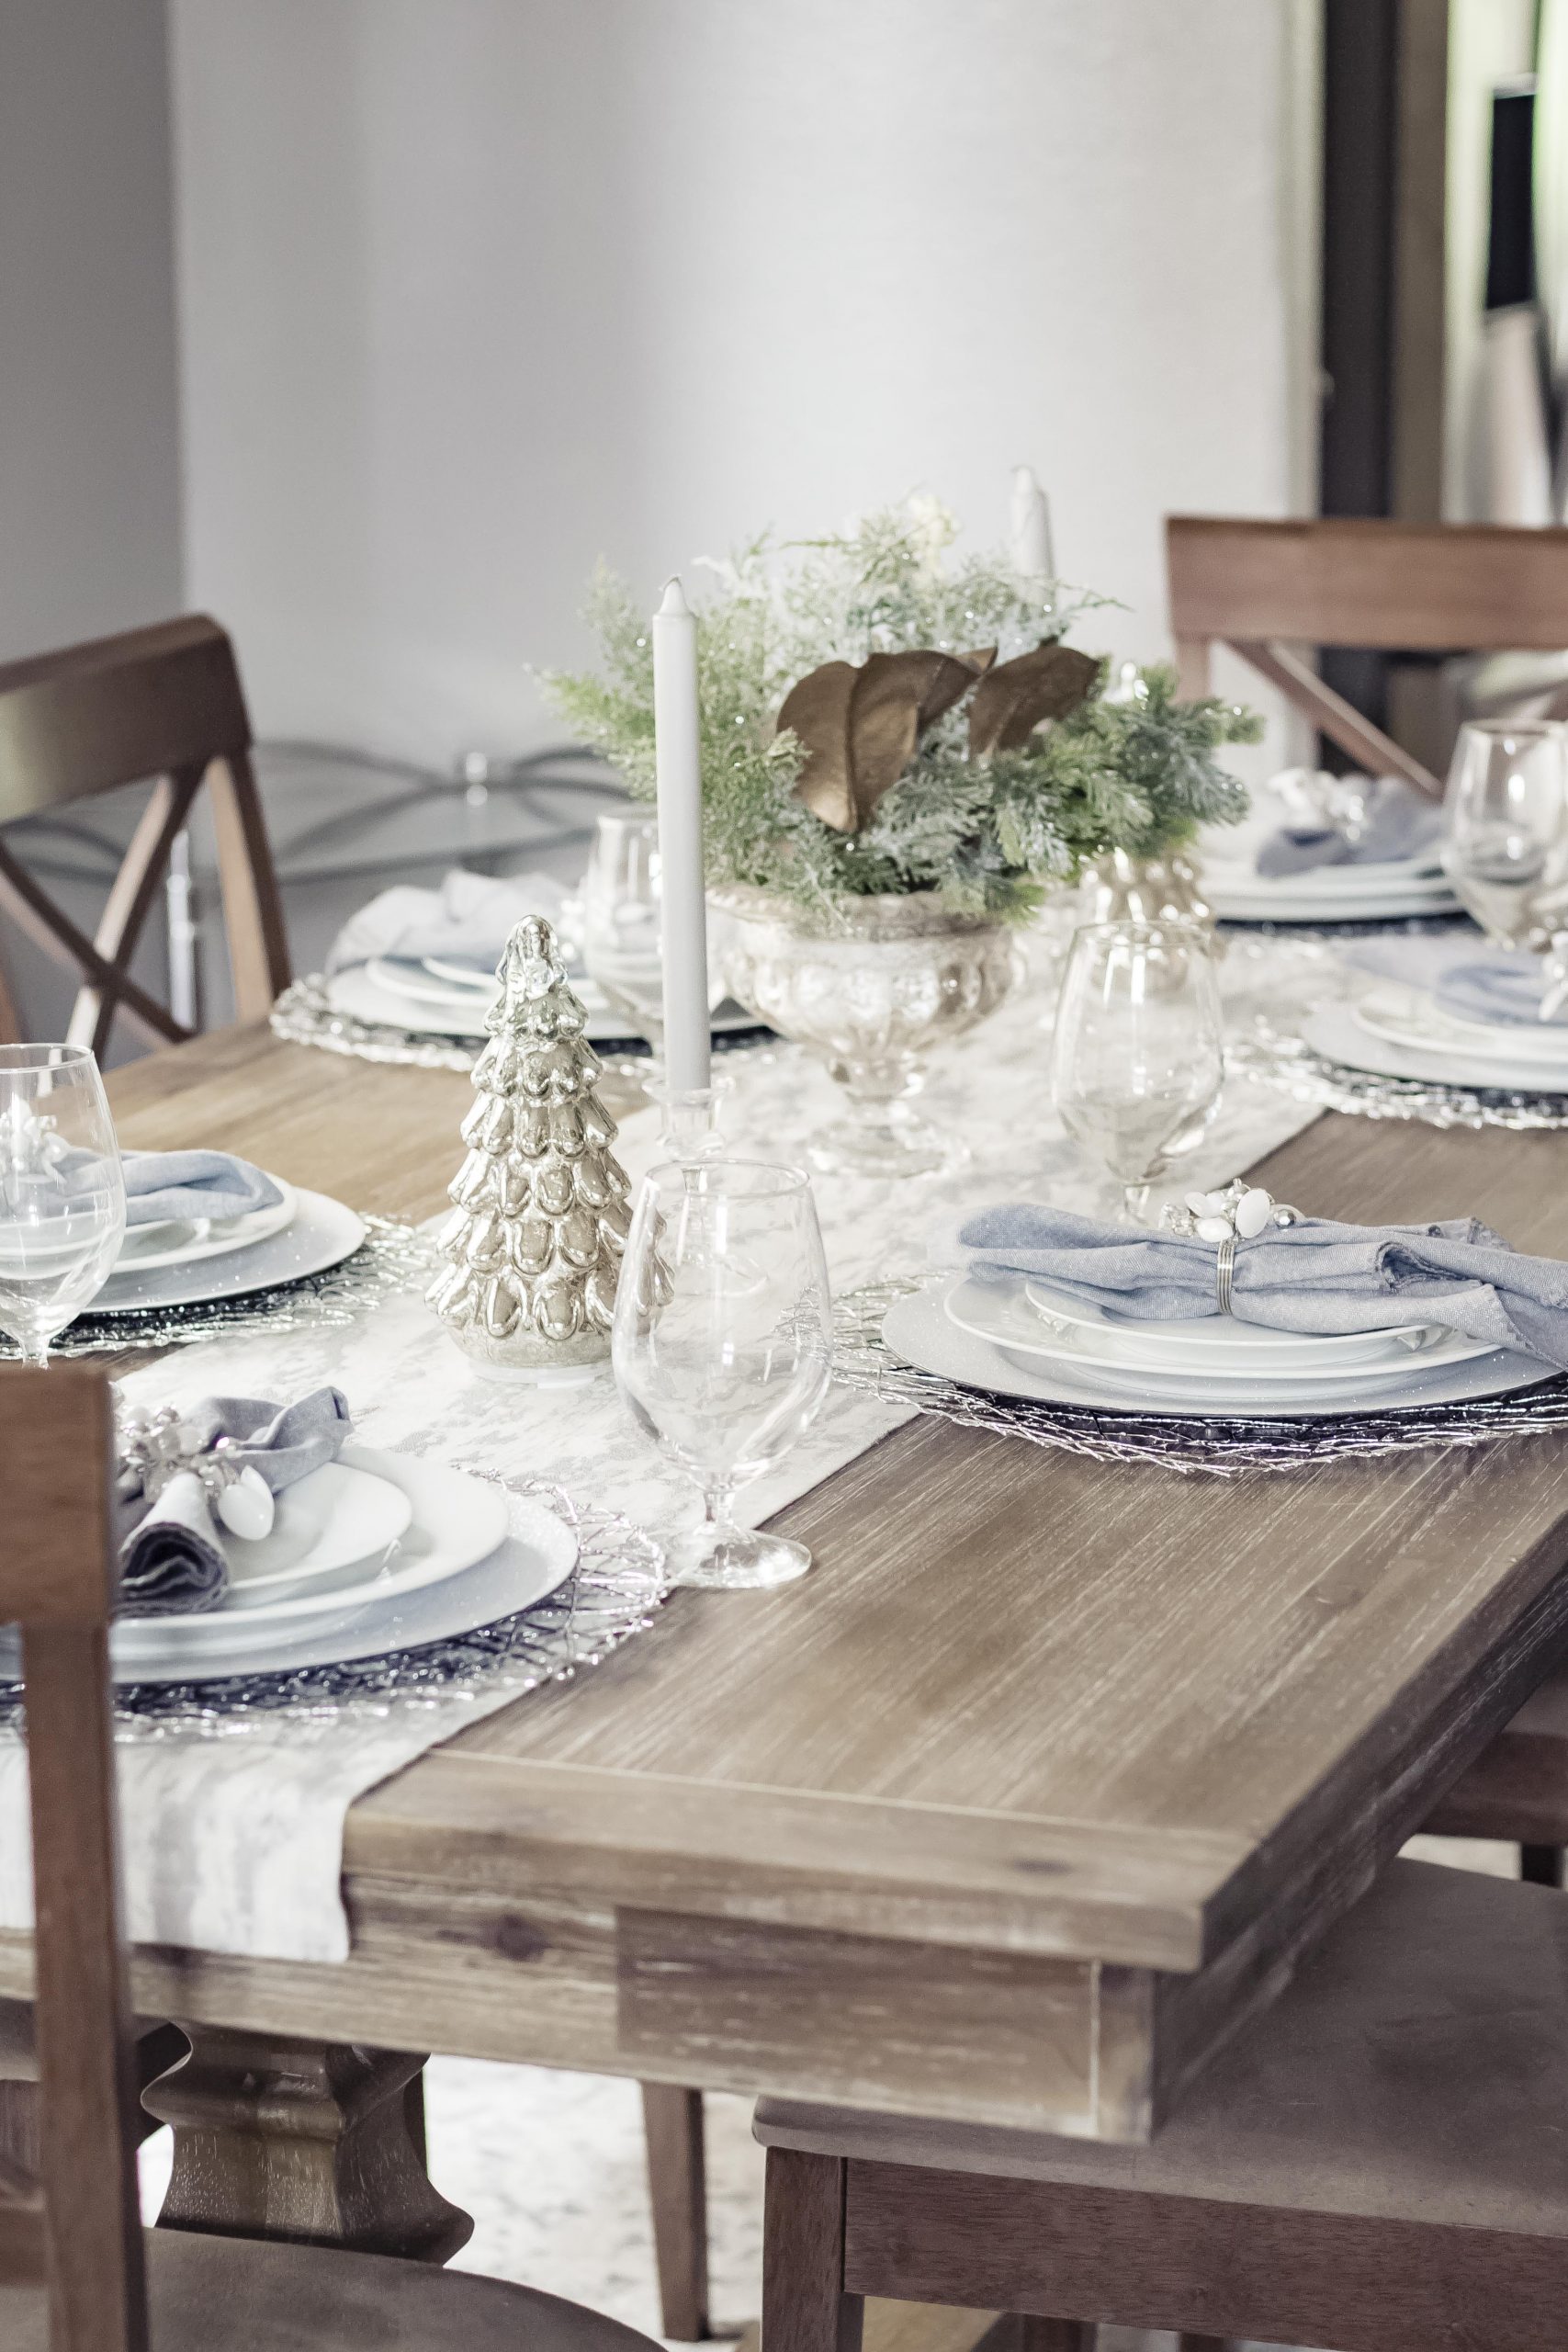 TWO AFFORDABLE WAYS TO DECORATE YOUR TABLETOP FOR CHRISTMAS